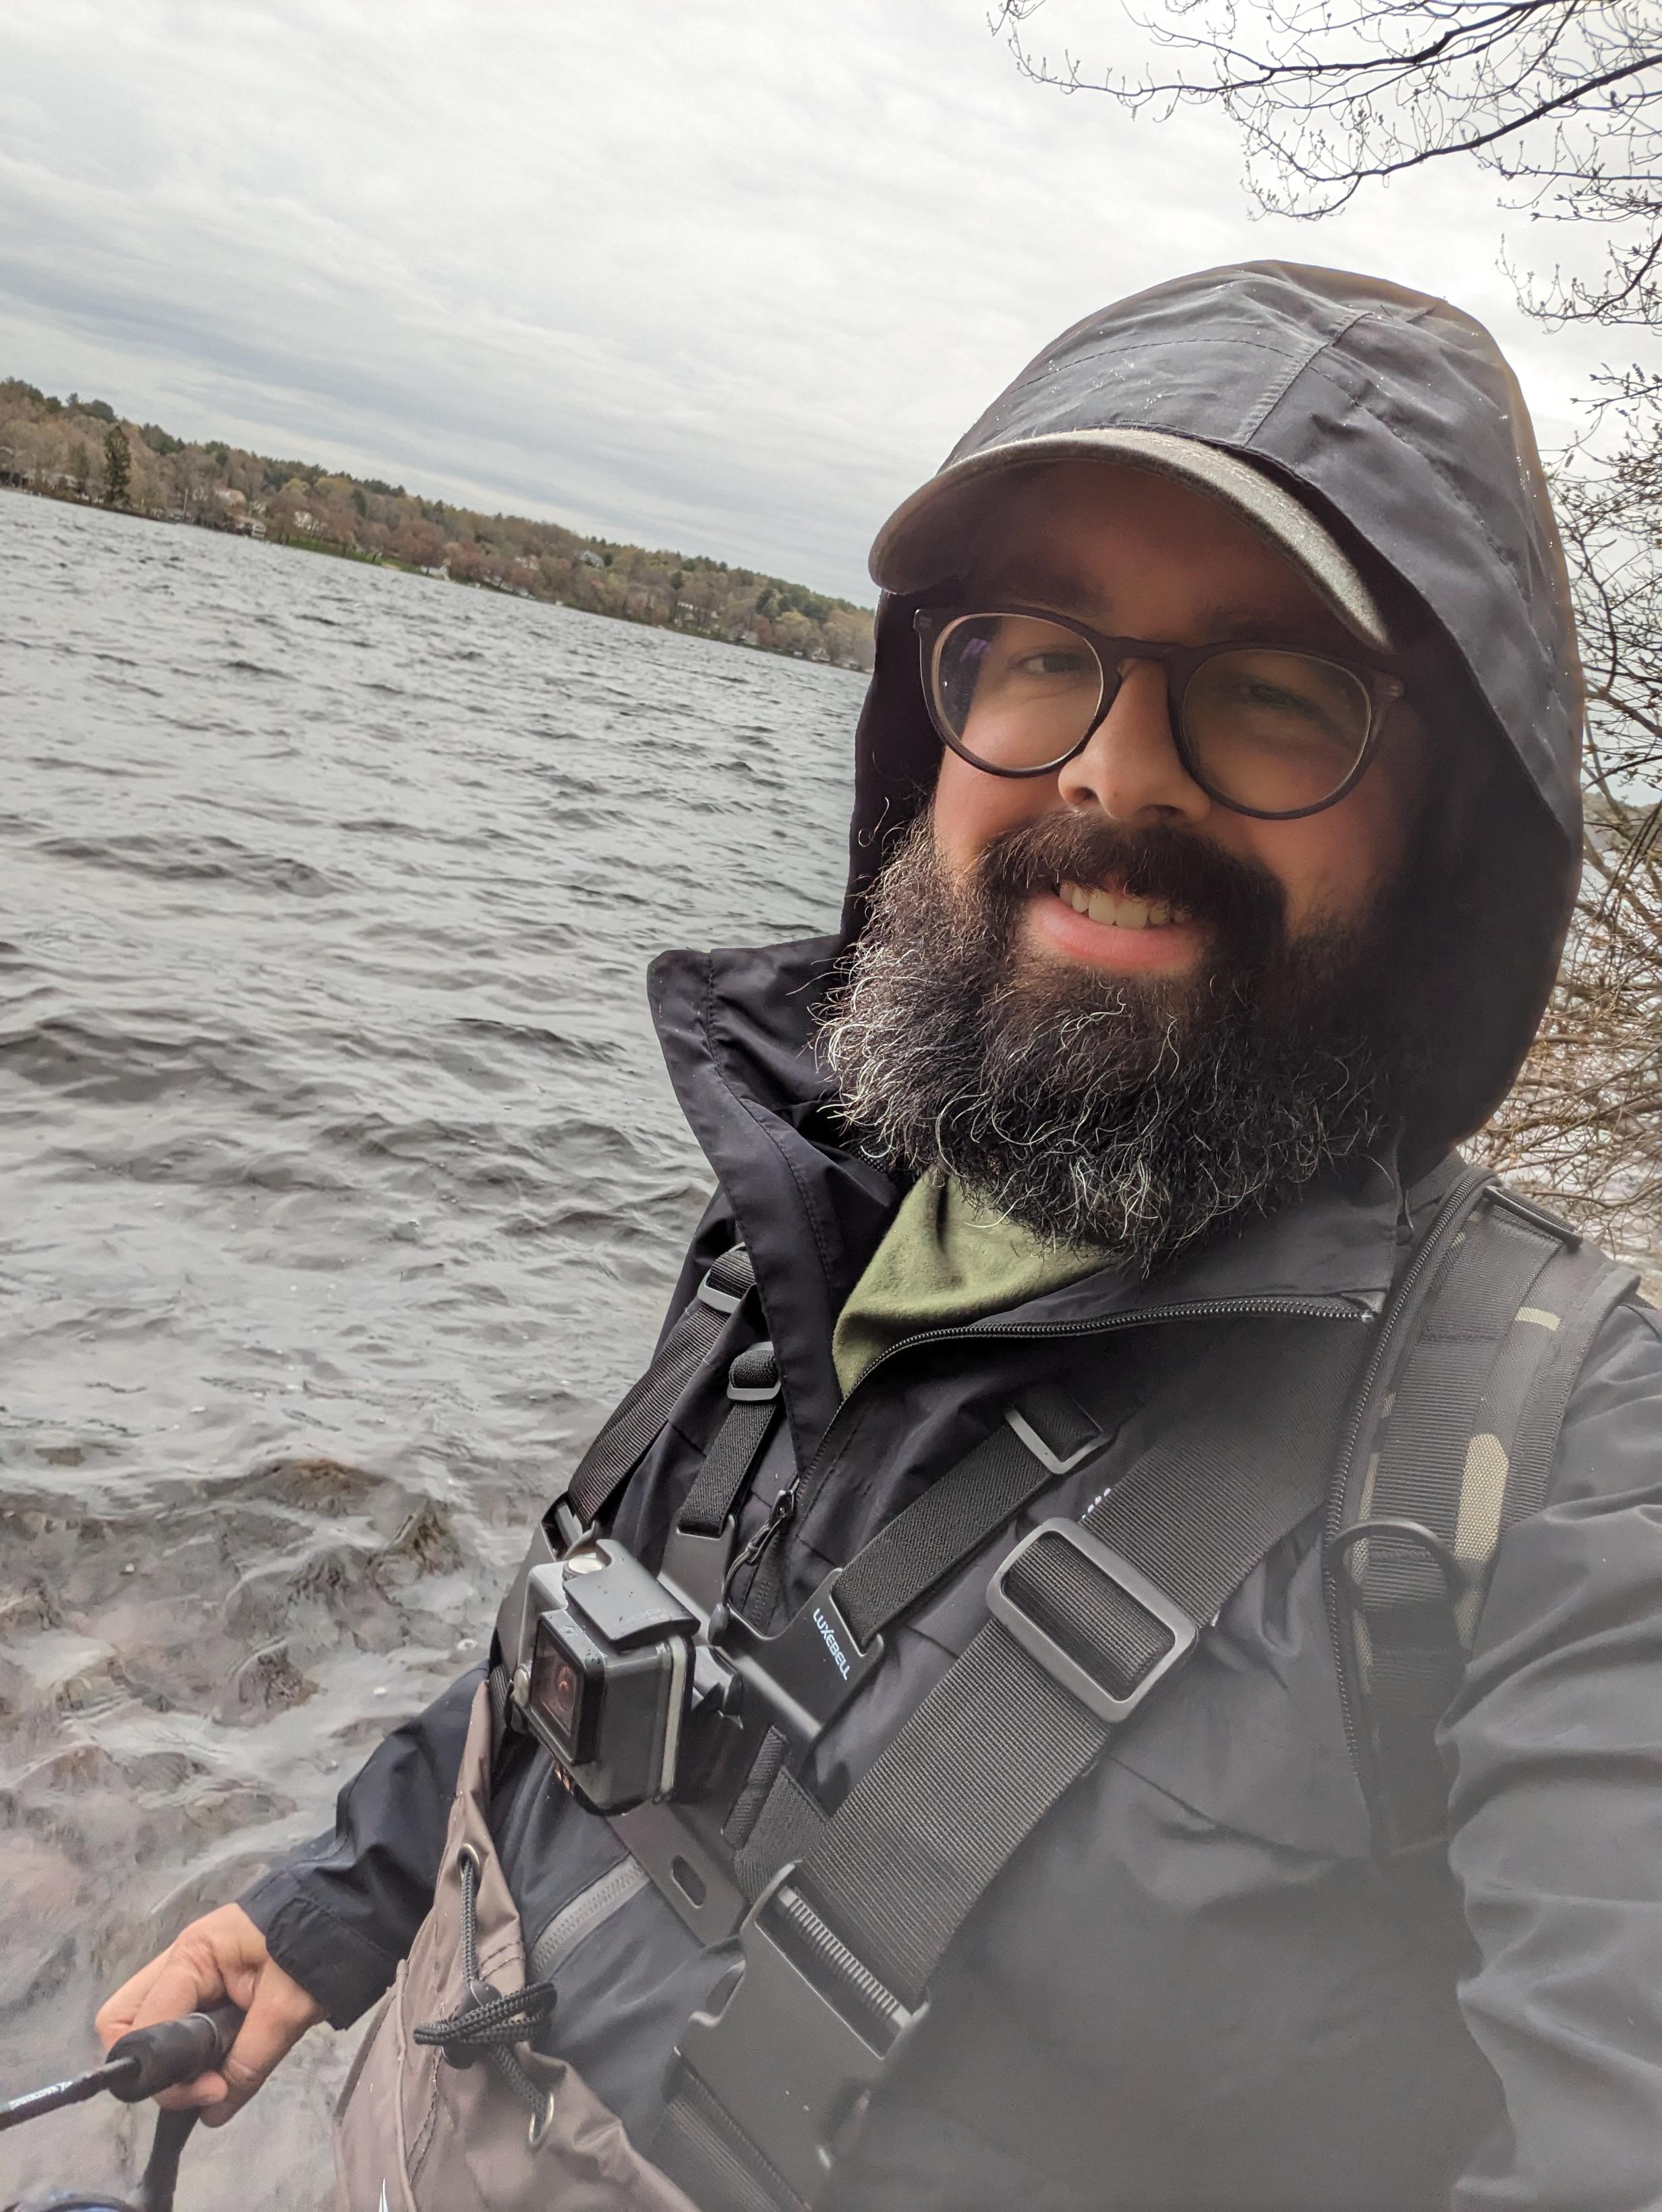 Selfie of myself, Andrew Augusto, fishing on a rainy day in fishing waders